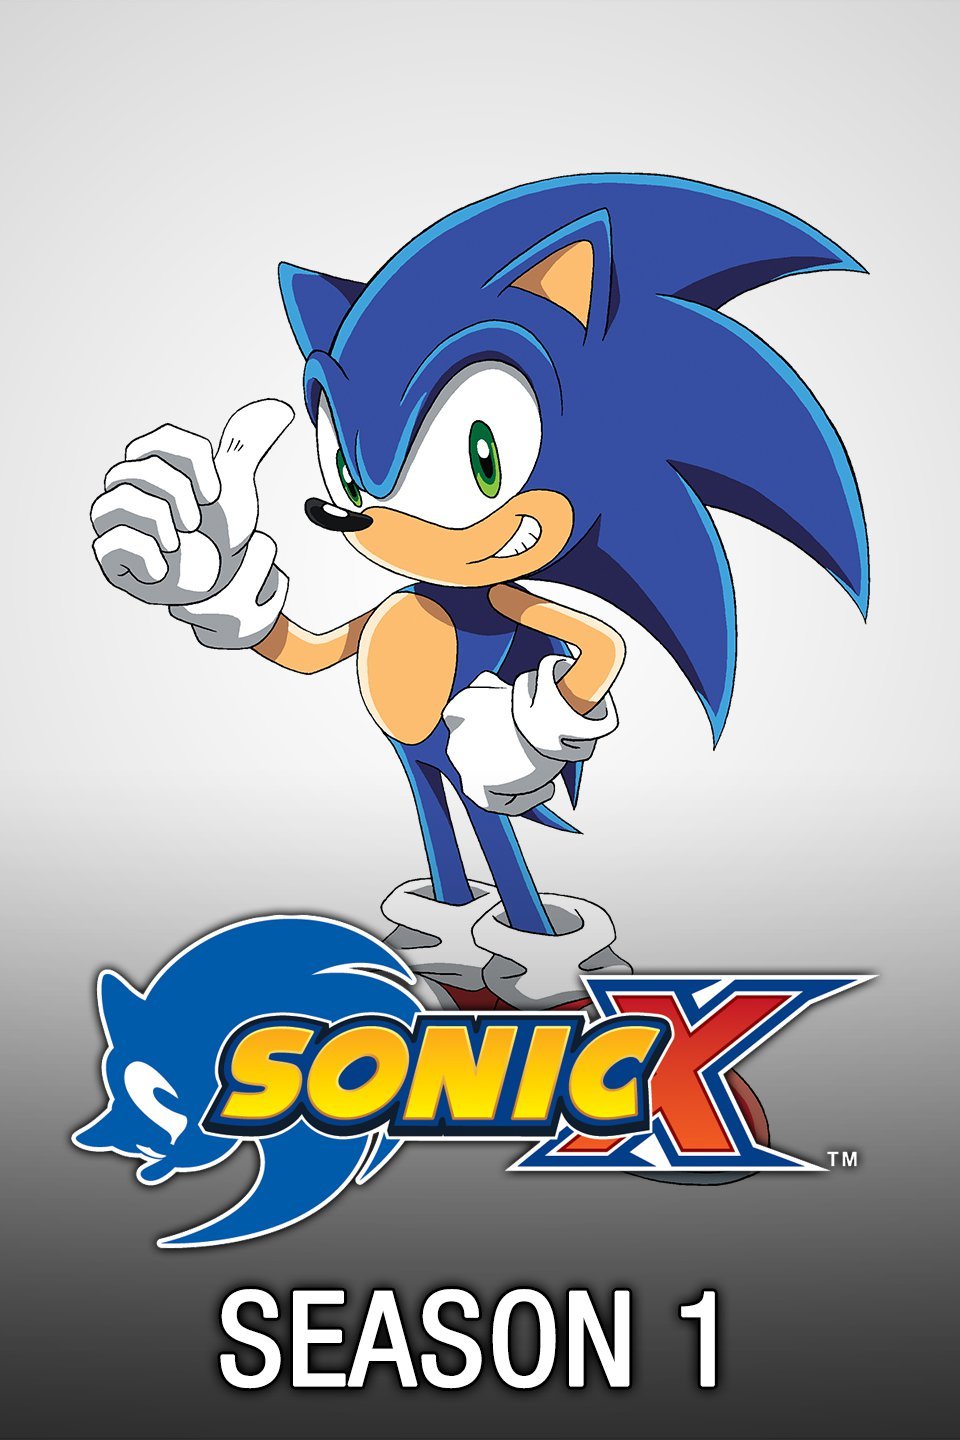 oosters Onzuiver ego Sonic X - Rotten Tomatoes